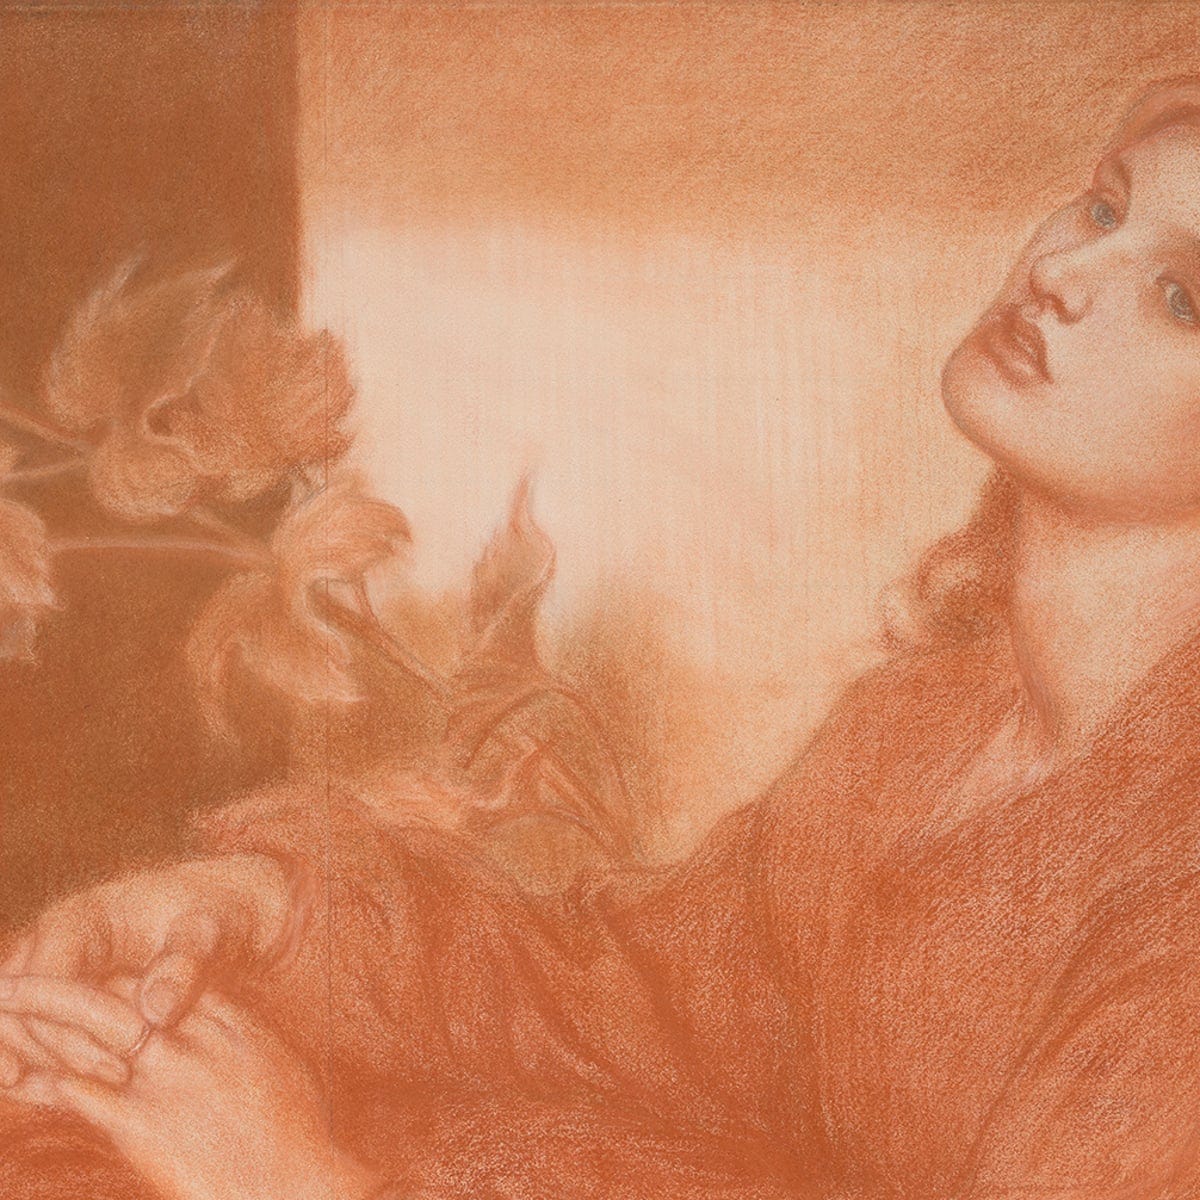 Rossetti drawing found in Edinburgh bookshop to go on display | The  pre-Raphaelites | The Guardian